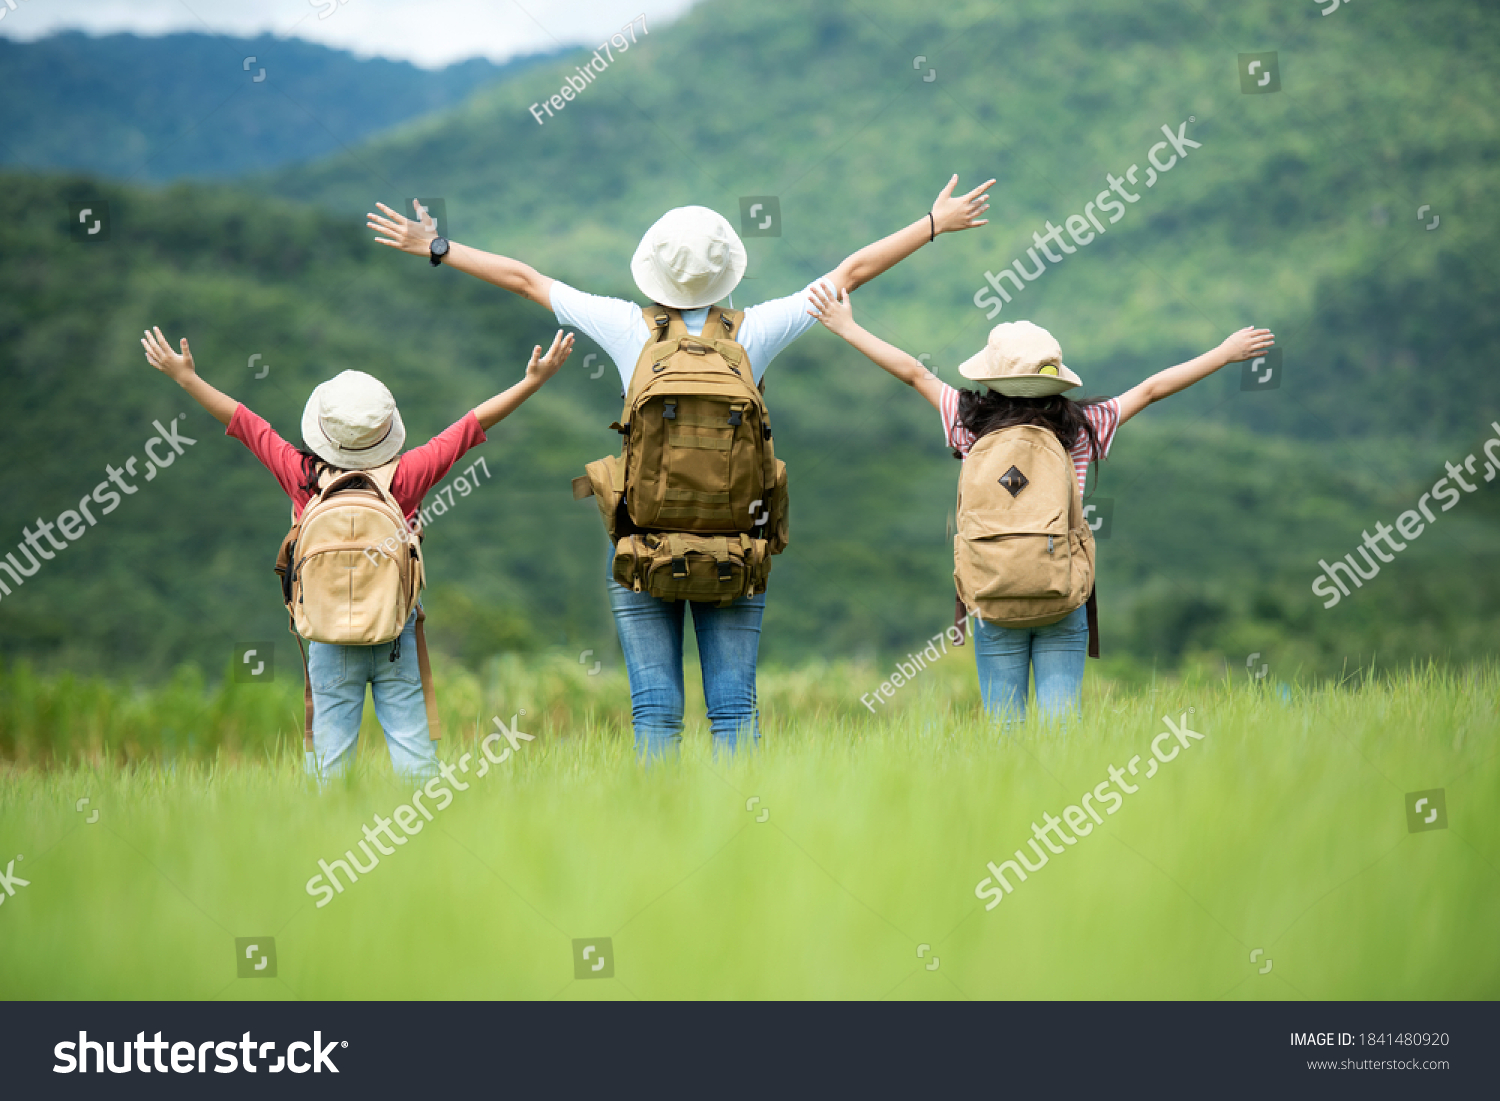 Group family children travel nature trips raise arms and standing see mountain outdoors, adventure and tourism for destination leisure trips for education and relax in nature park. Travel vacations  #1841480920